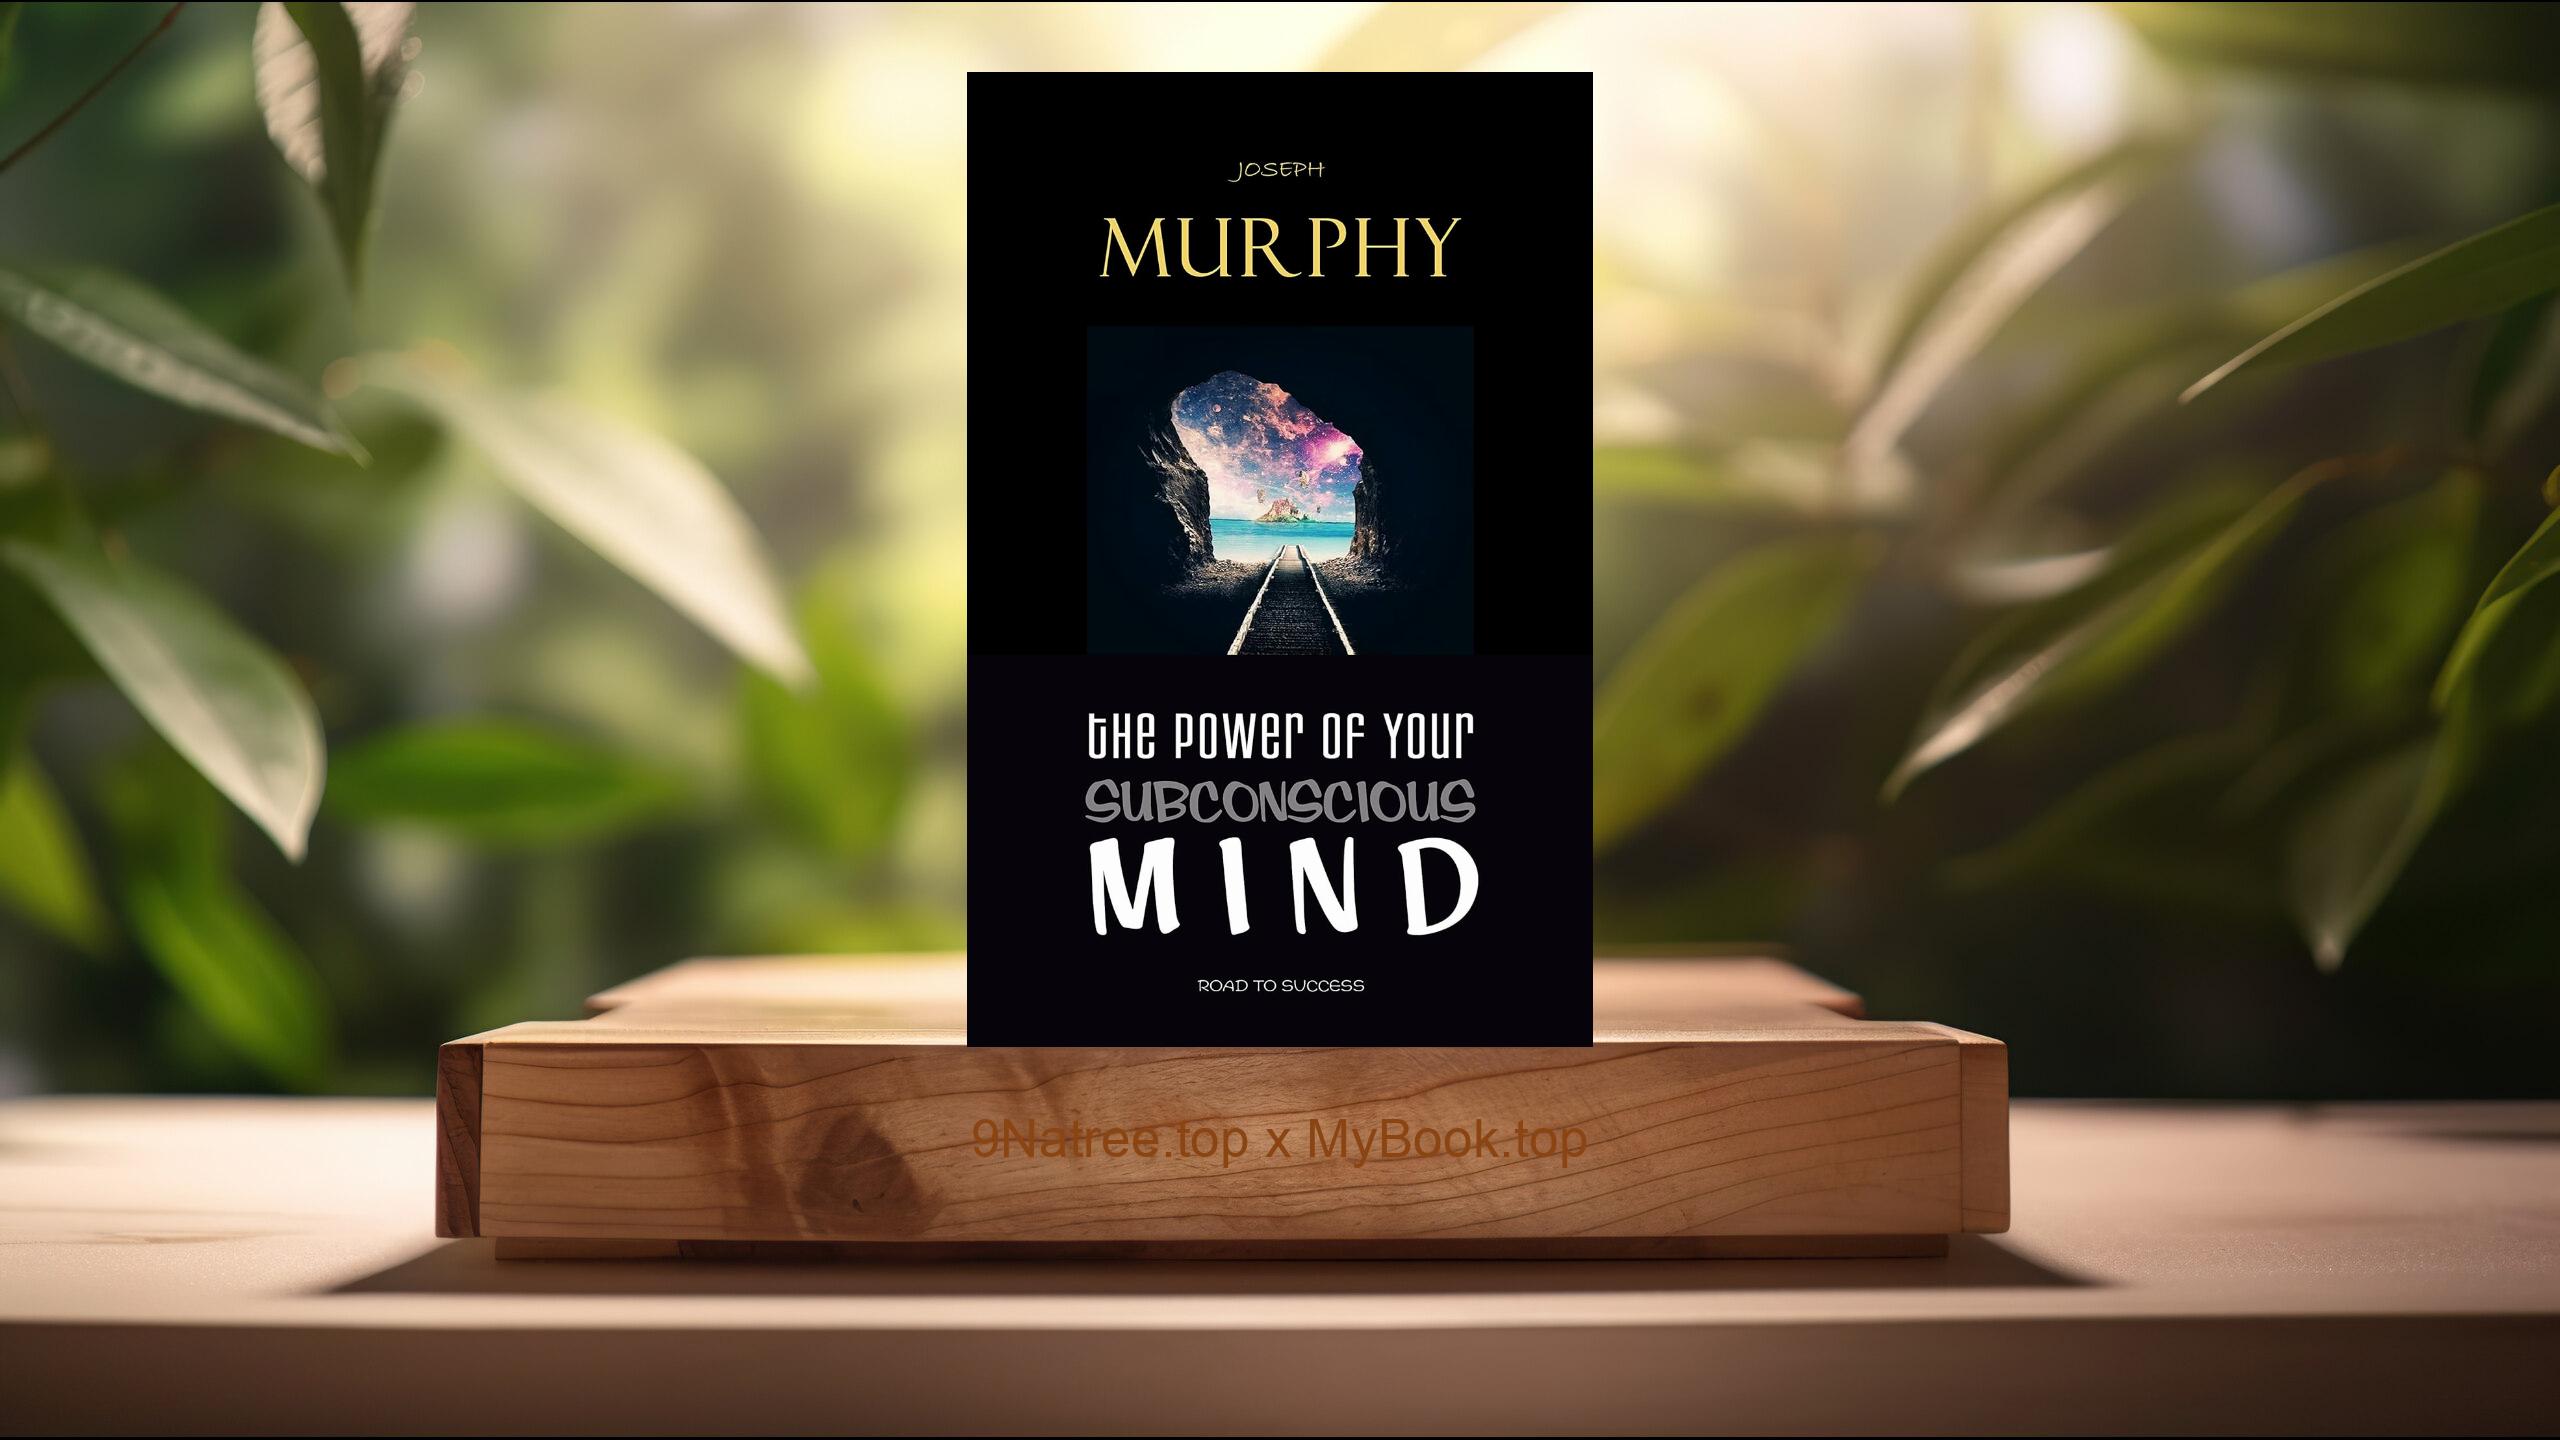 [Review] The Power of Your Subconscious Mind (Joseph Murphy) Summarized